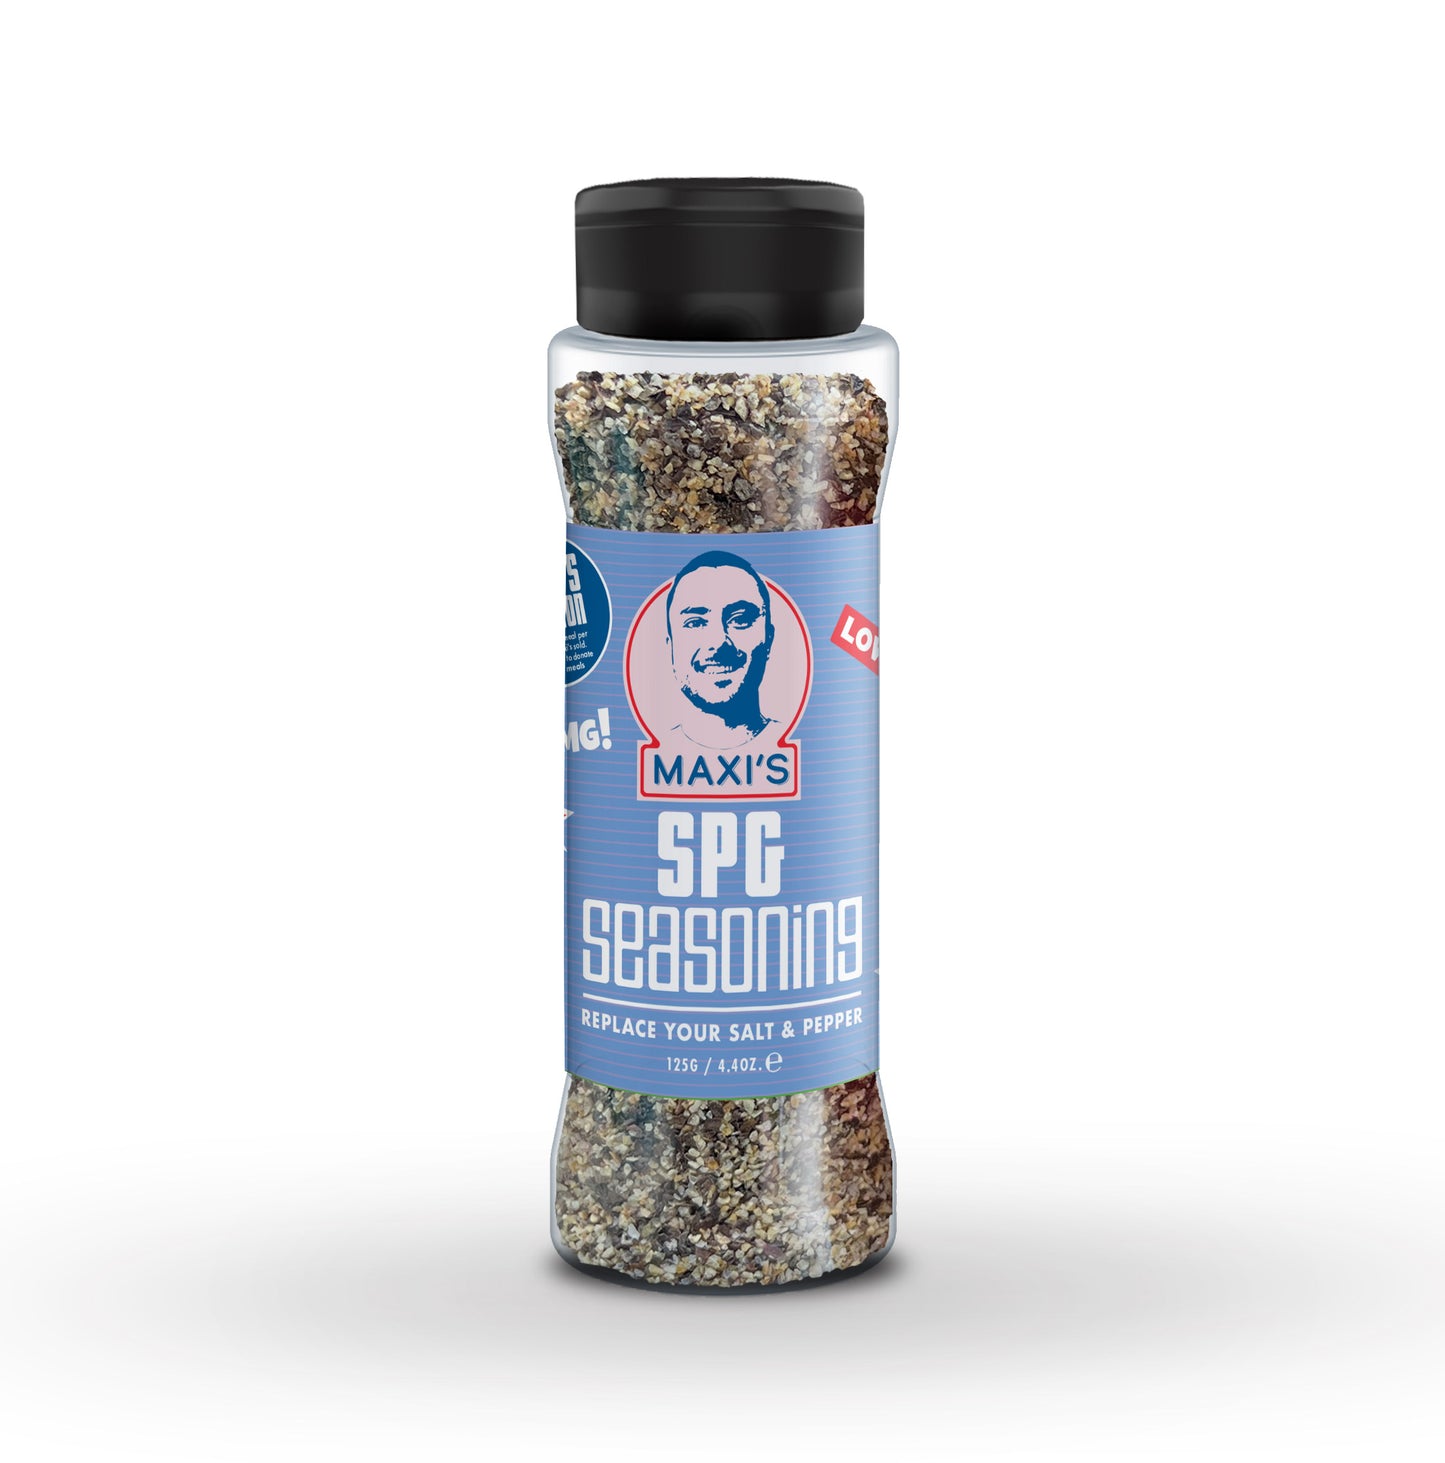 Maxi’s Ultimate Seasoning Collection PRE-ORDER